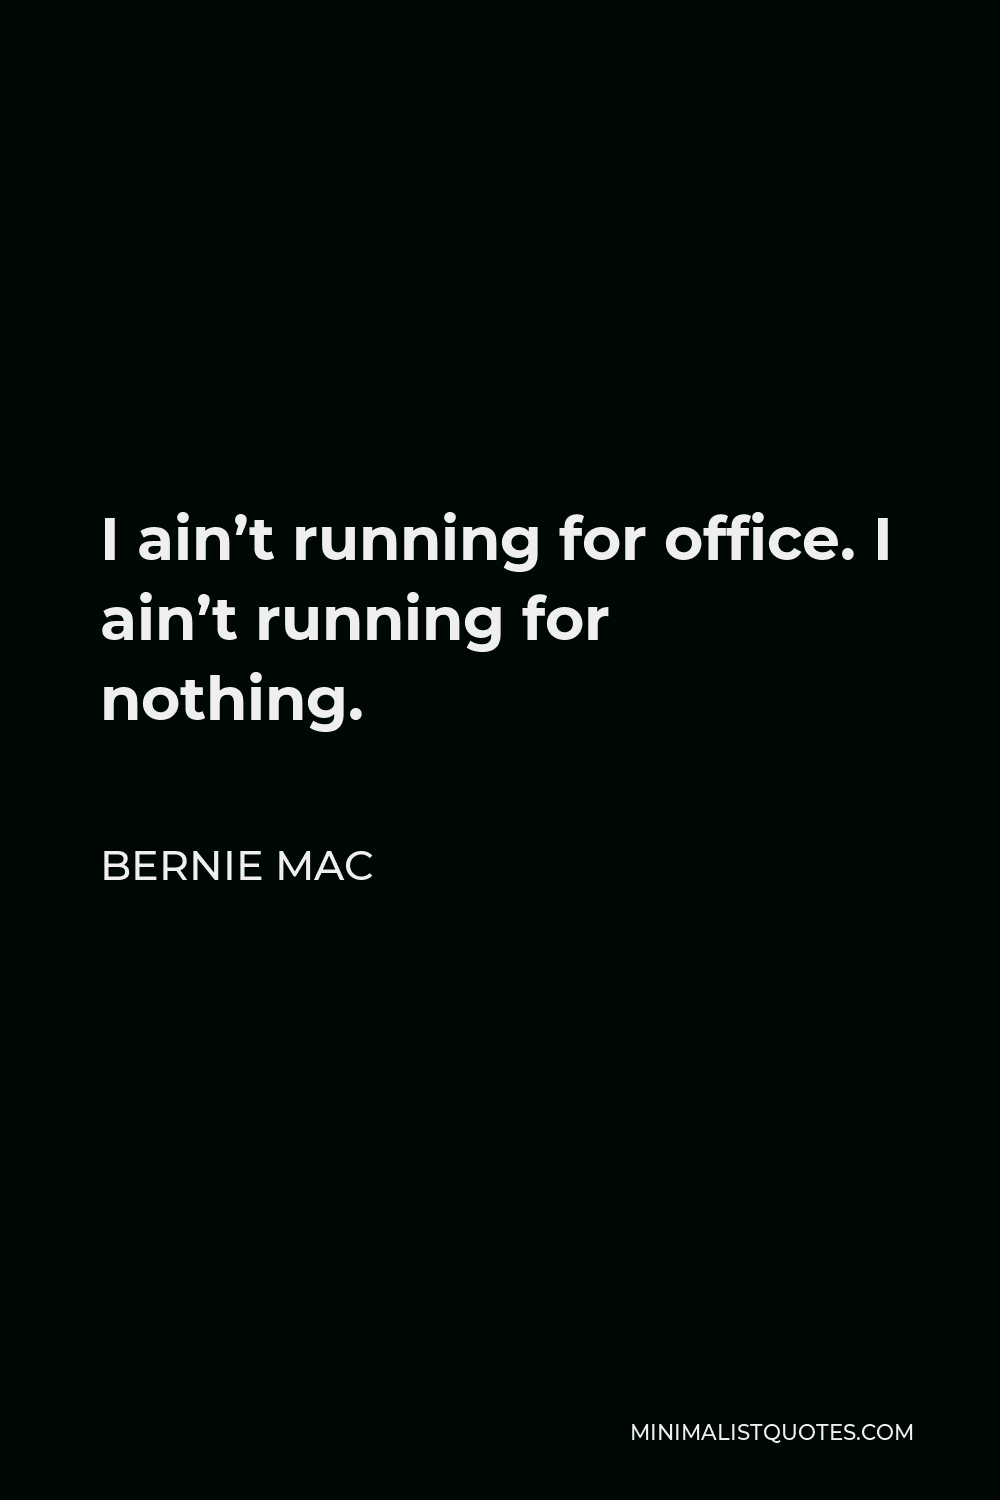 Bernie Mac Quote - I ain’t running for office. I ain’t running for nothing.